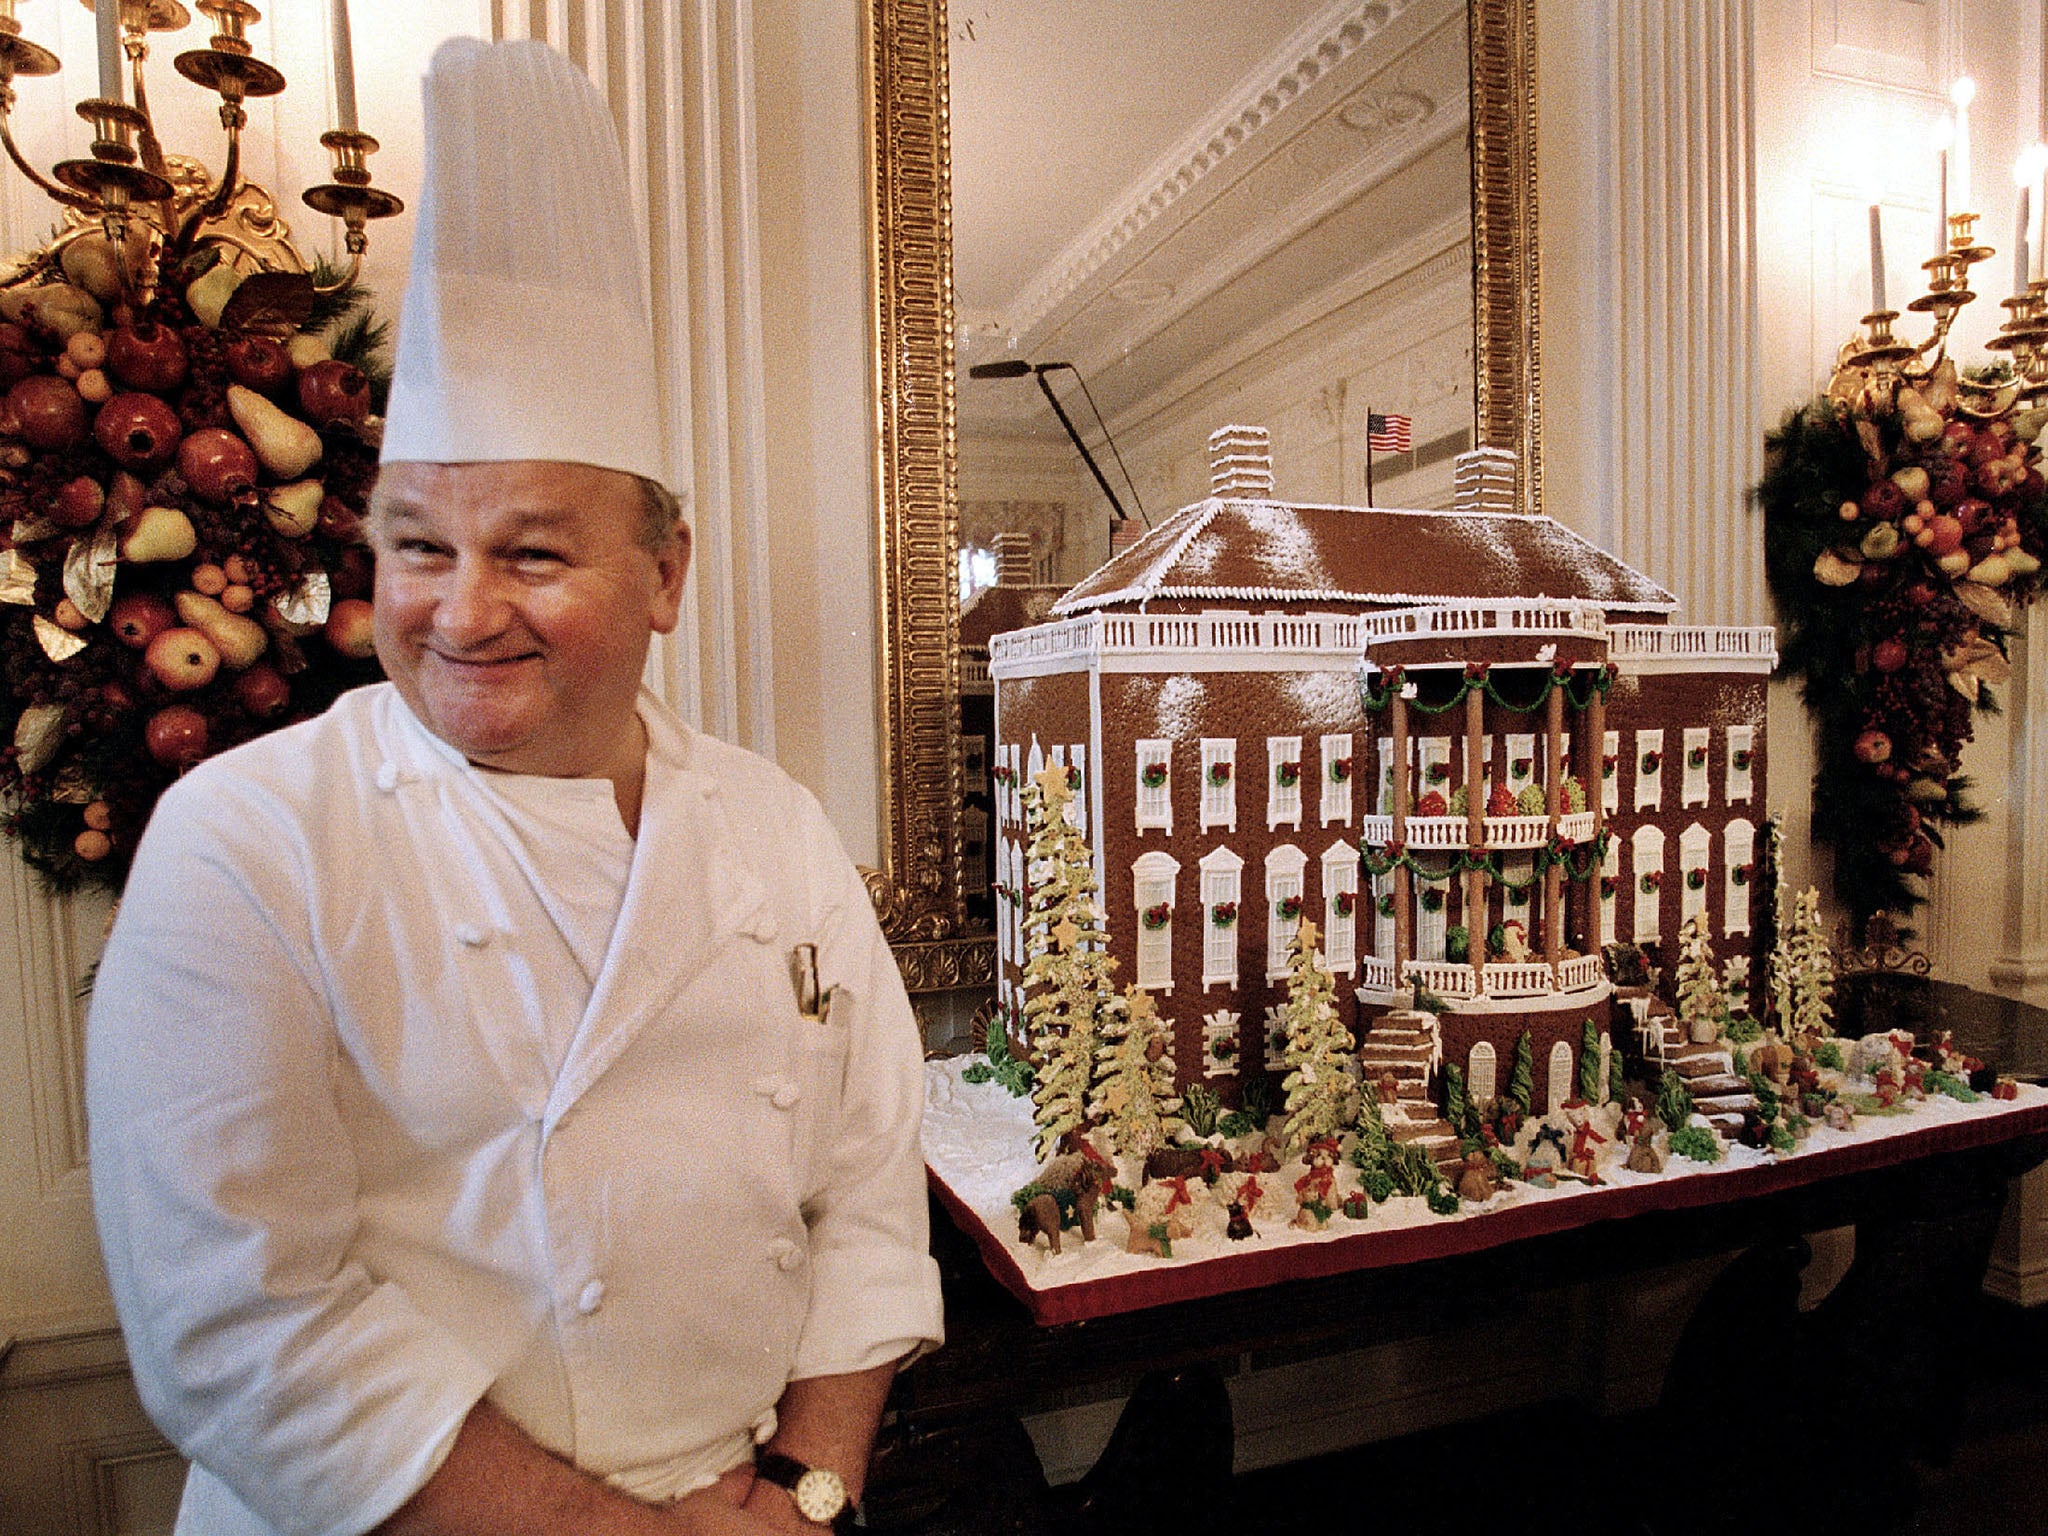 Roland Mesnier shows off the White House gingerbread house in 2002